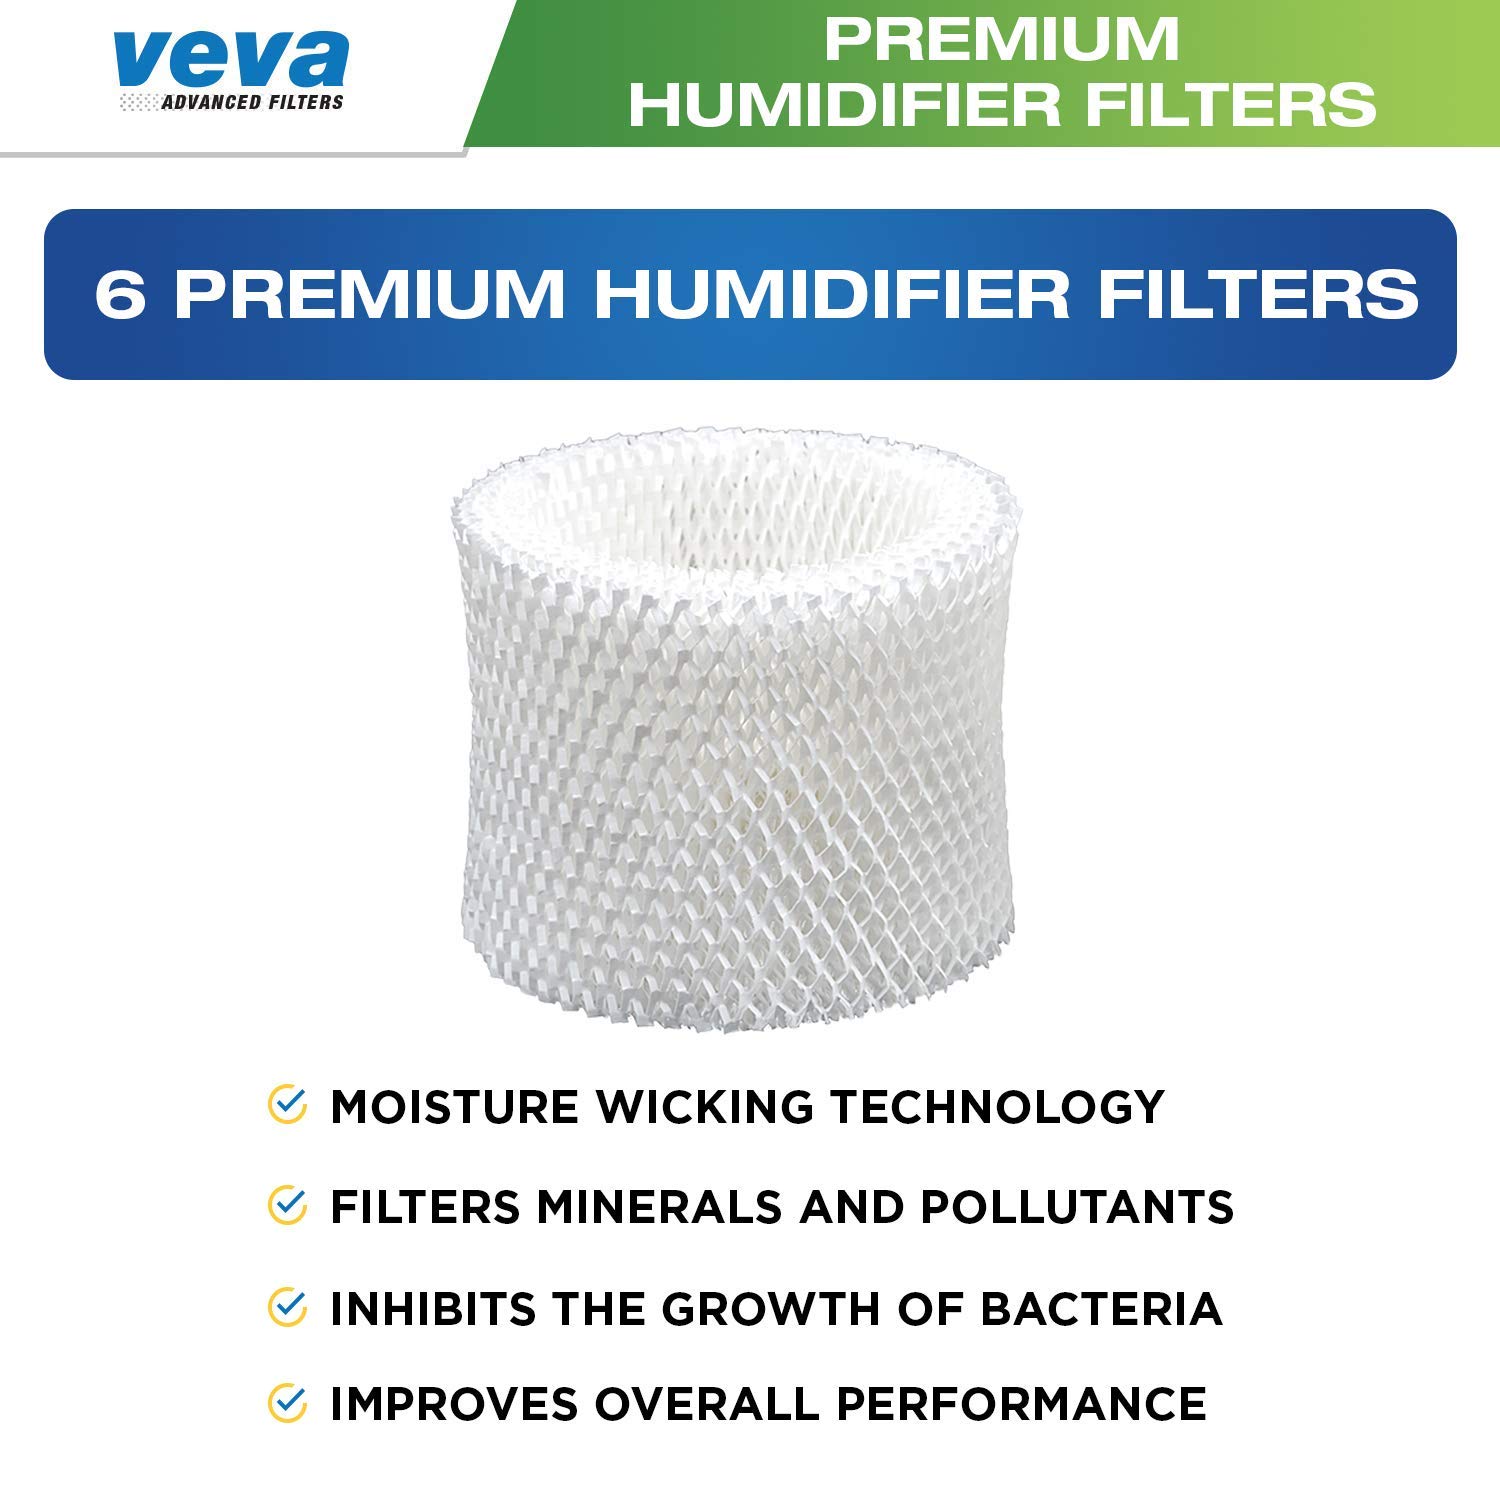 VEVA 6-Pack Premium Humidifier Filters - Replacement for HW Filter C, HC-888, HC-888N - Compatible with Cool Moisture Evaporative Humidifiers & HCM-890 Series